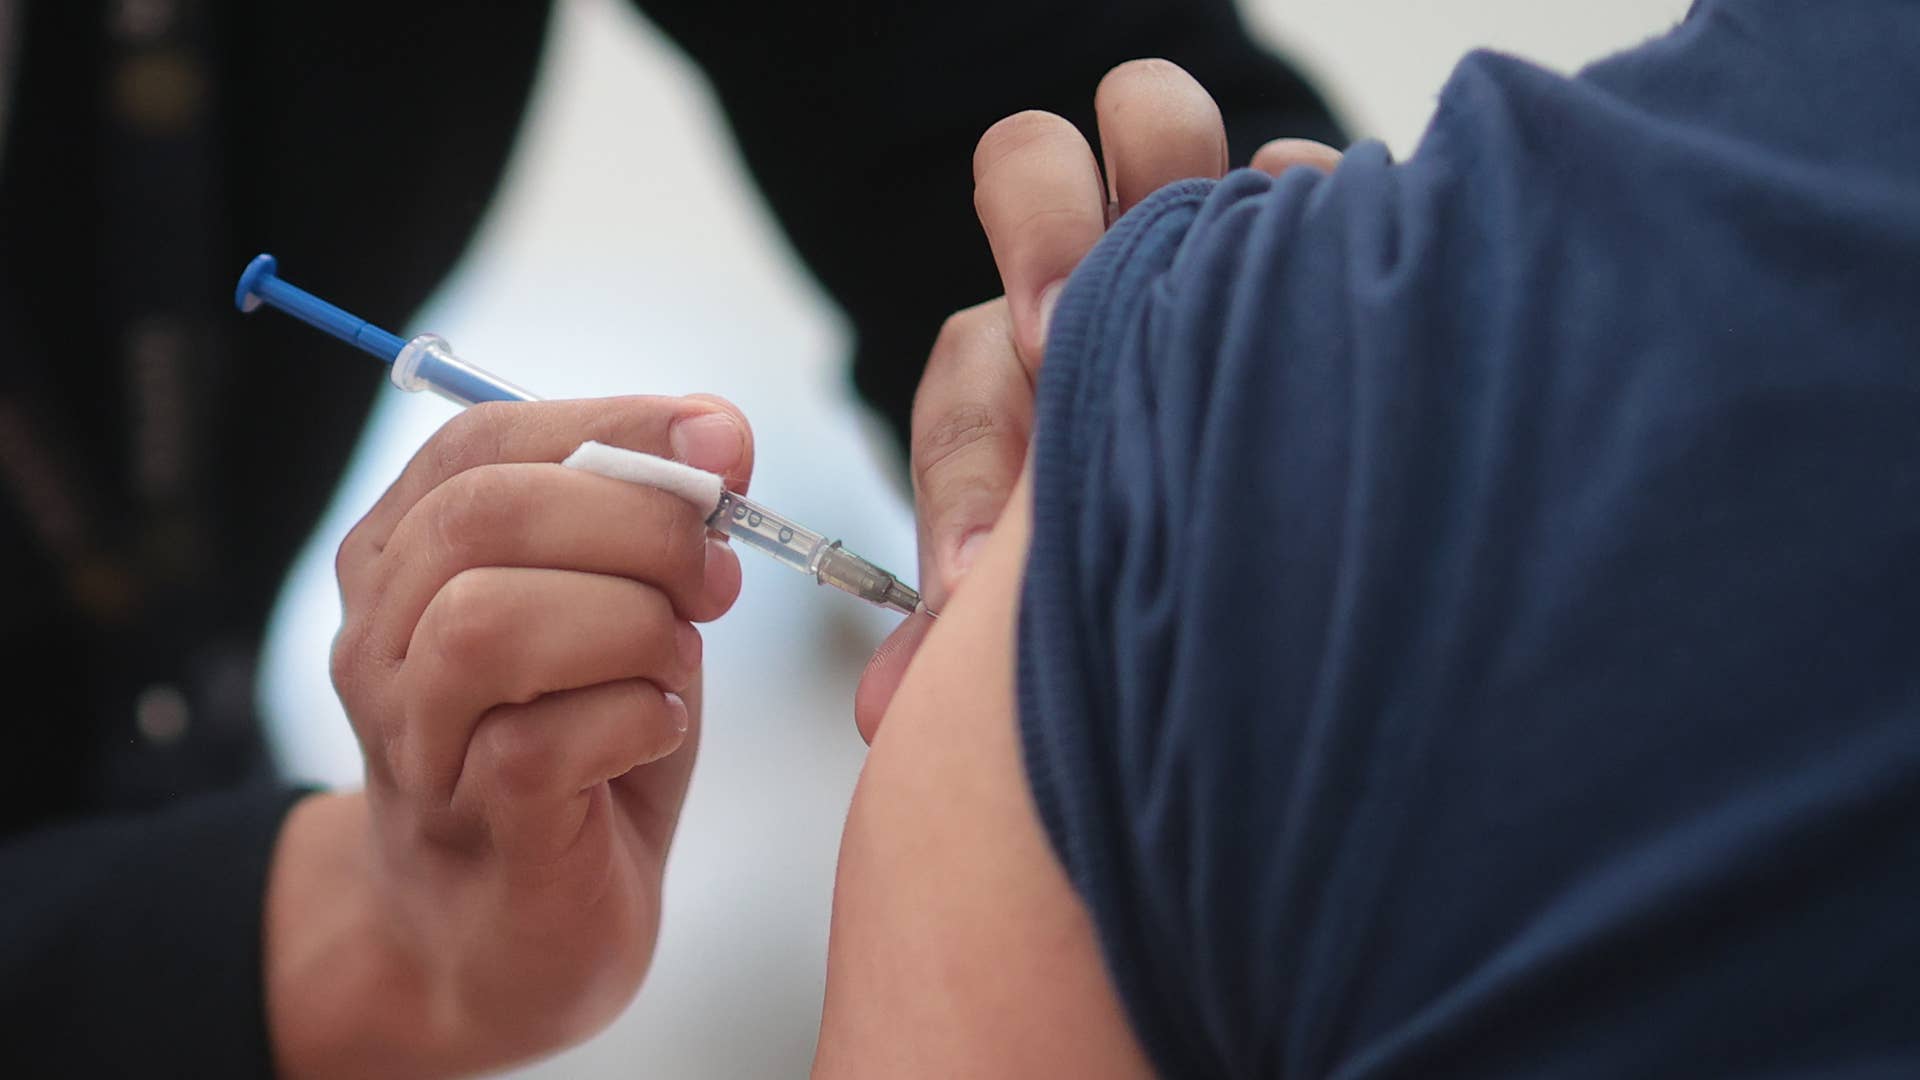 A citizen receives a dose of the vaccine for COVID-19 during a vaccination day.